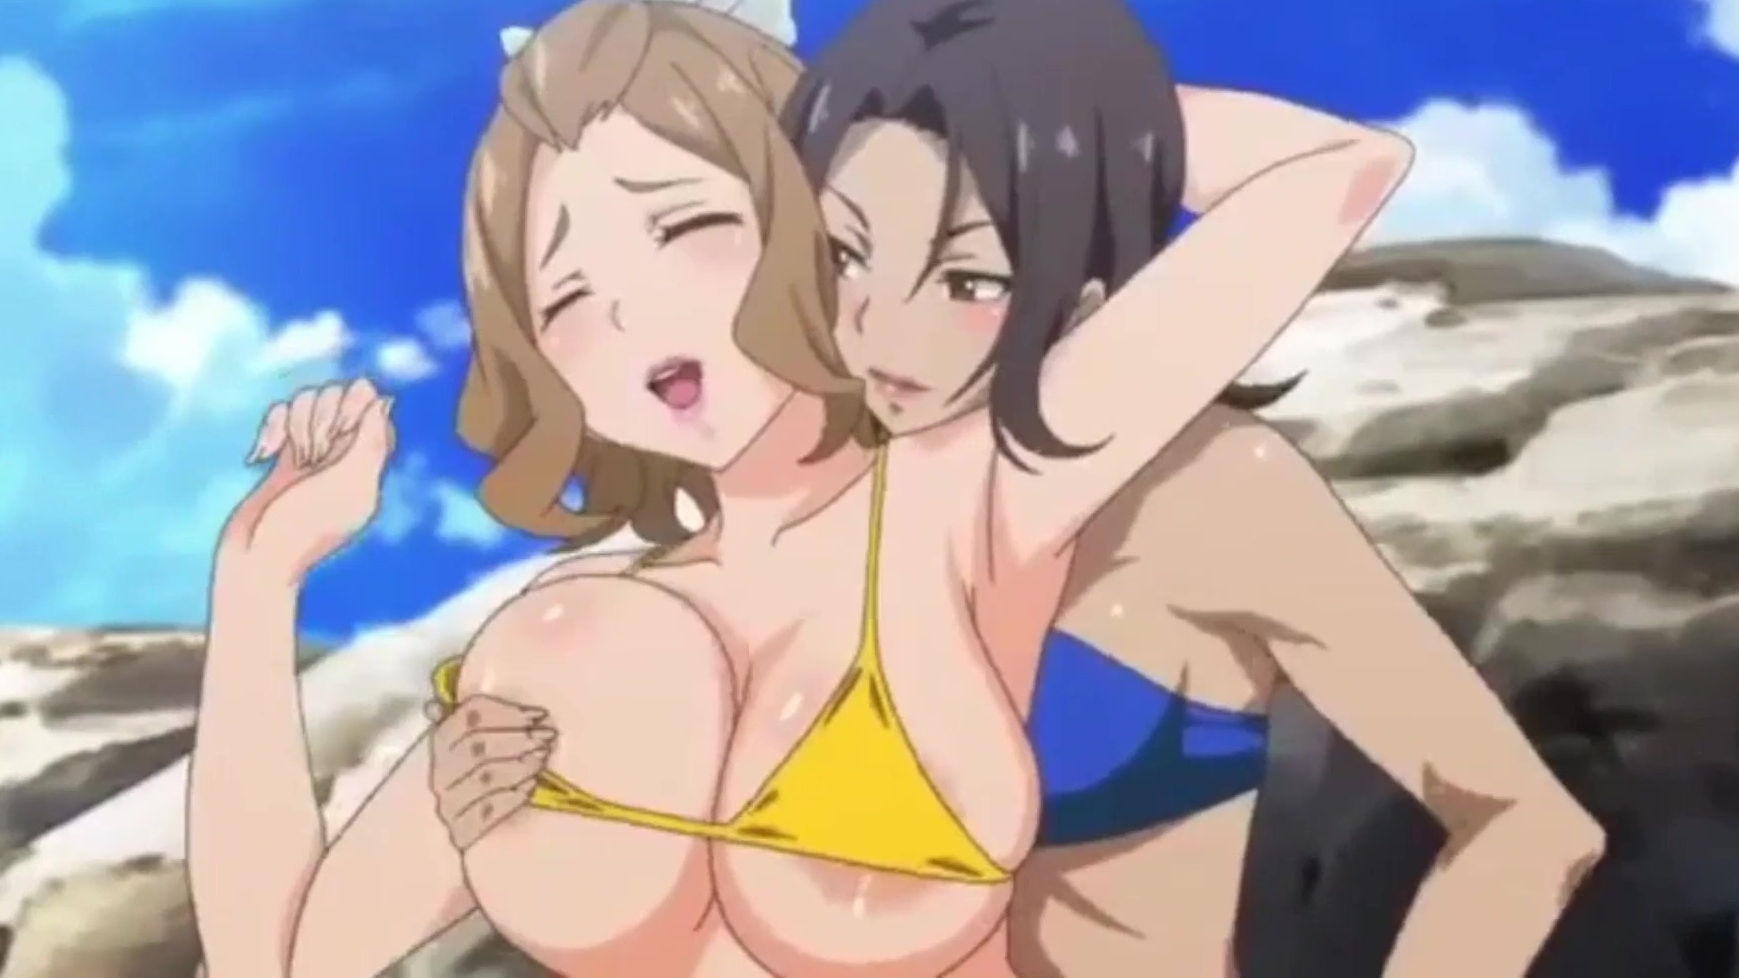 Anime Lesbian 69 Xxx - Hentai Compilation of Busty, Tits-crazy, Lesbian Valkyries